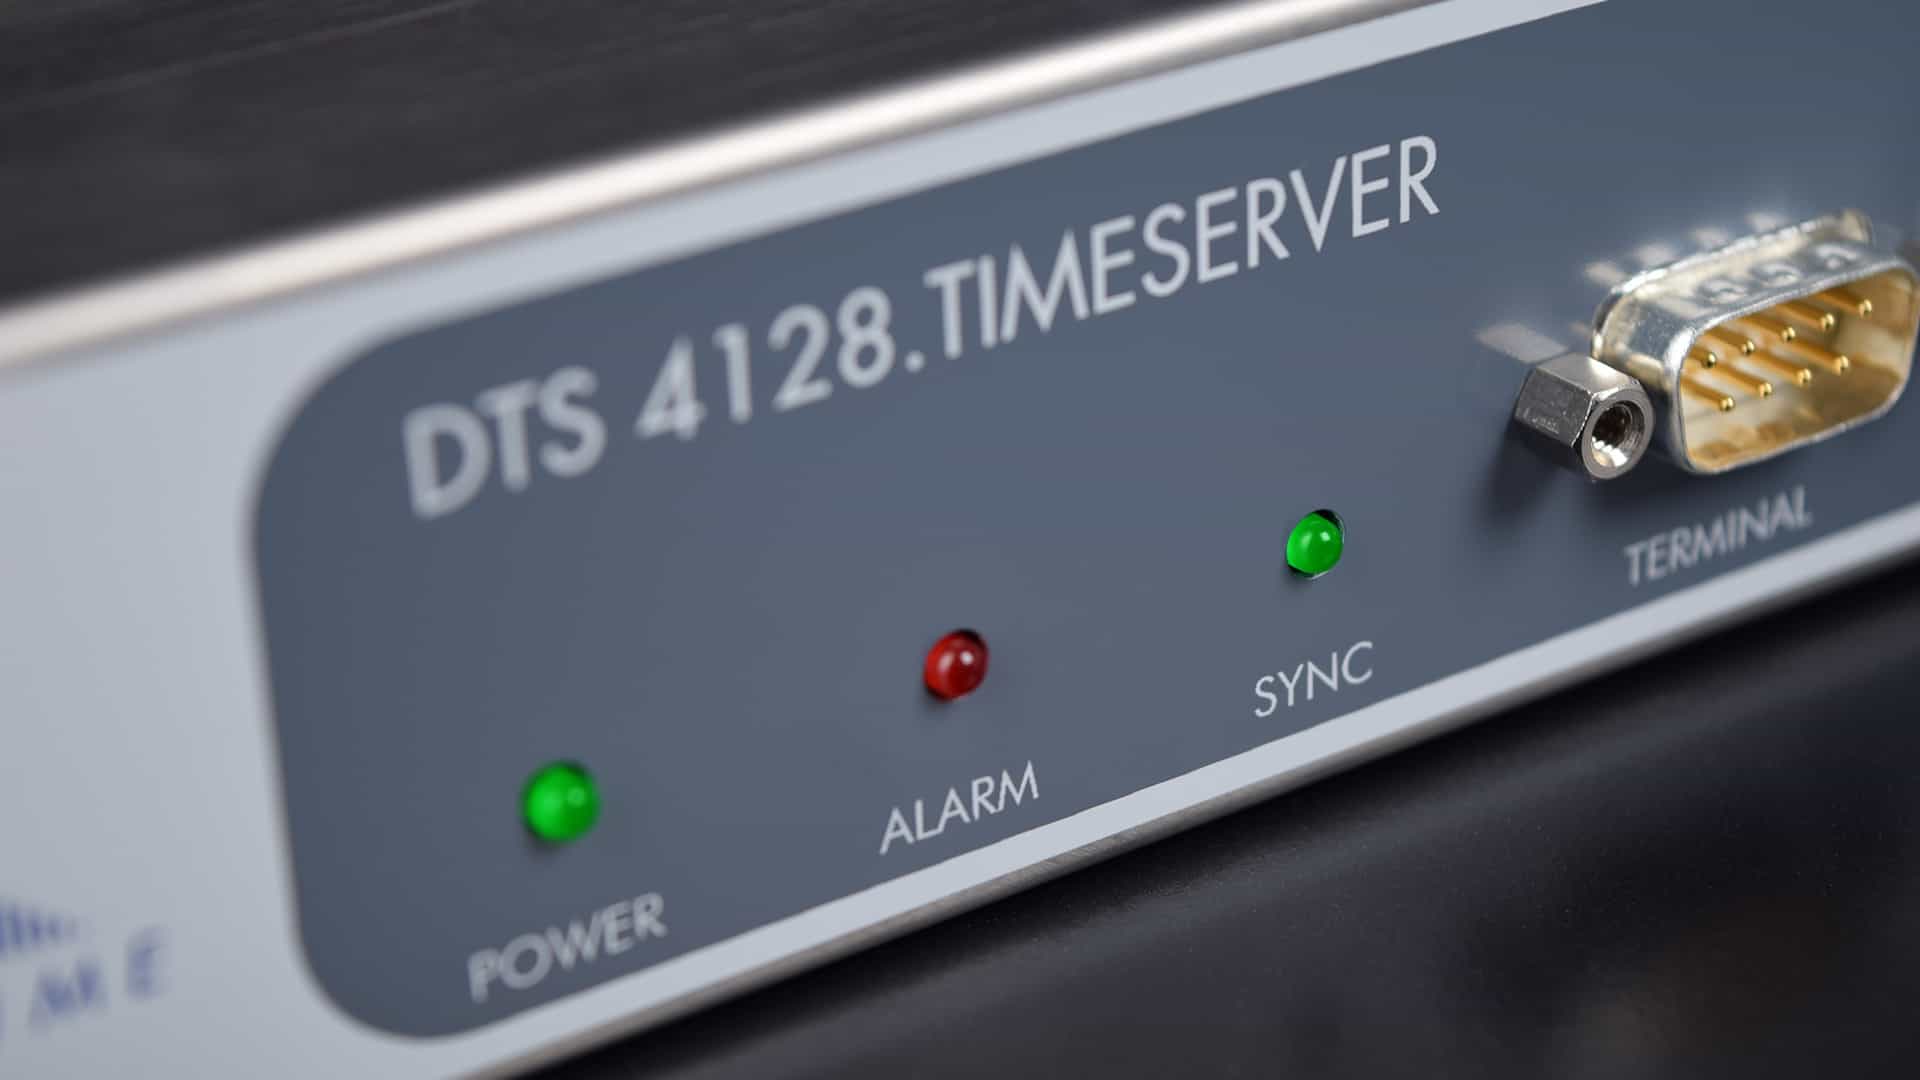 DTS 4128 Time Sever NTP